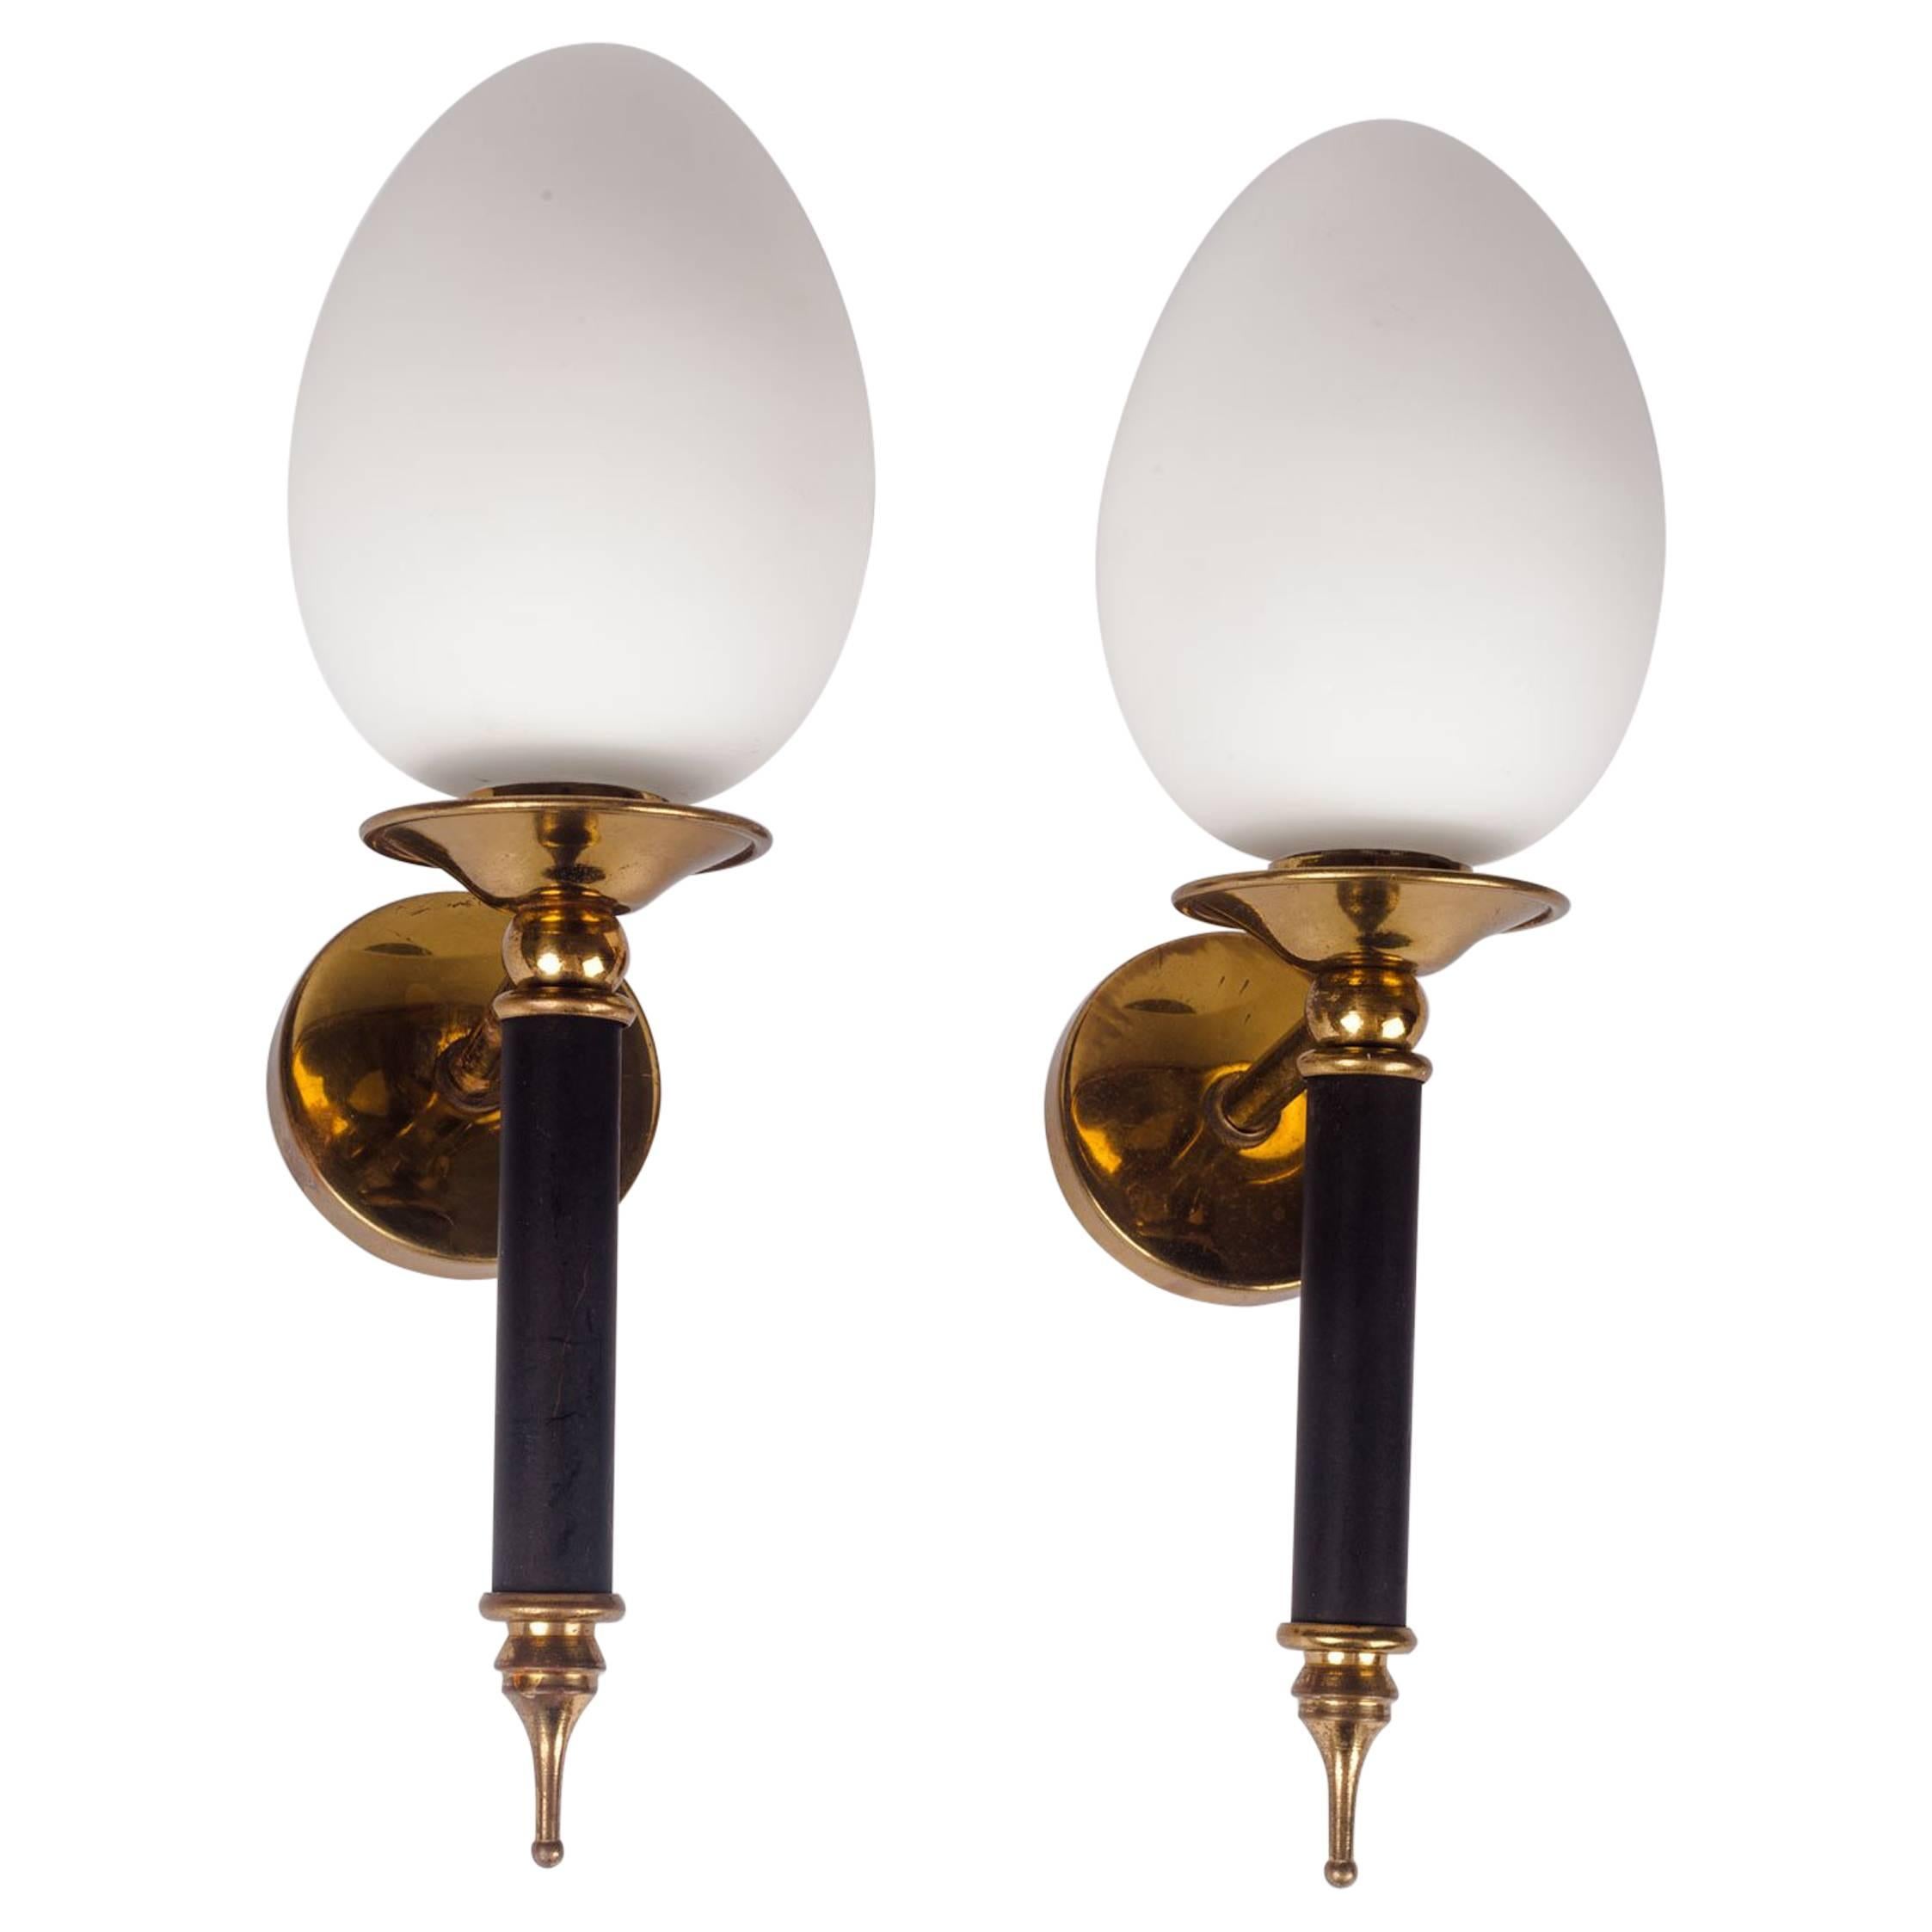 Pair of Arlus Sconces, Brass and Milk Glass, France, 1950s